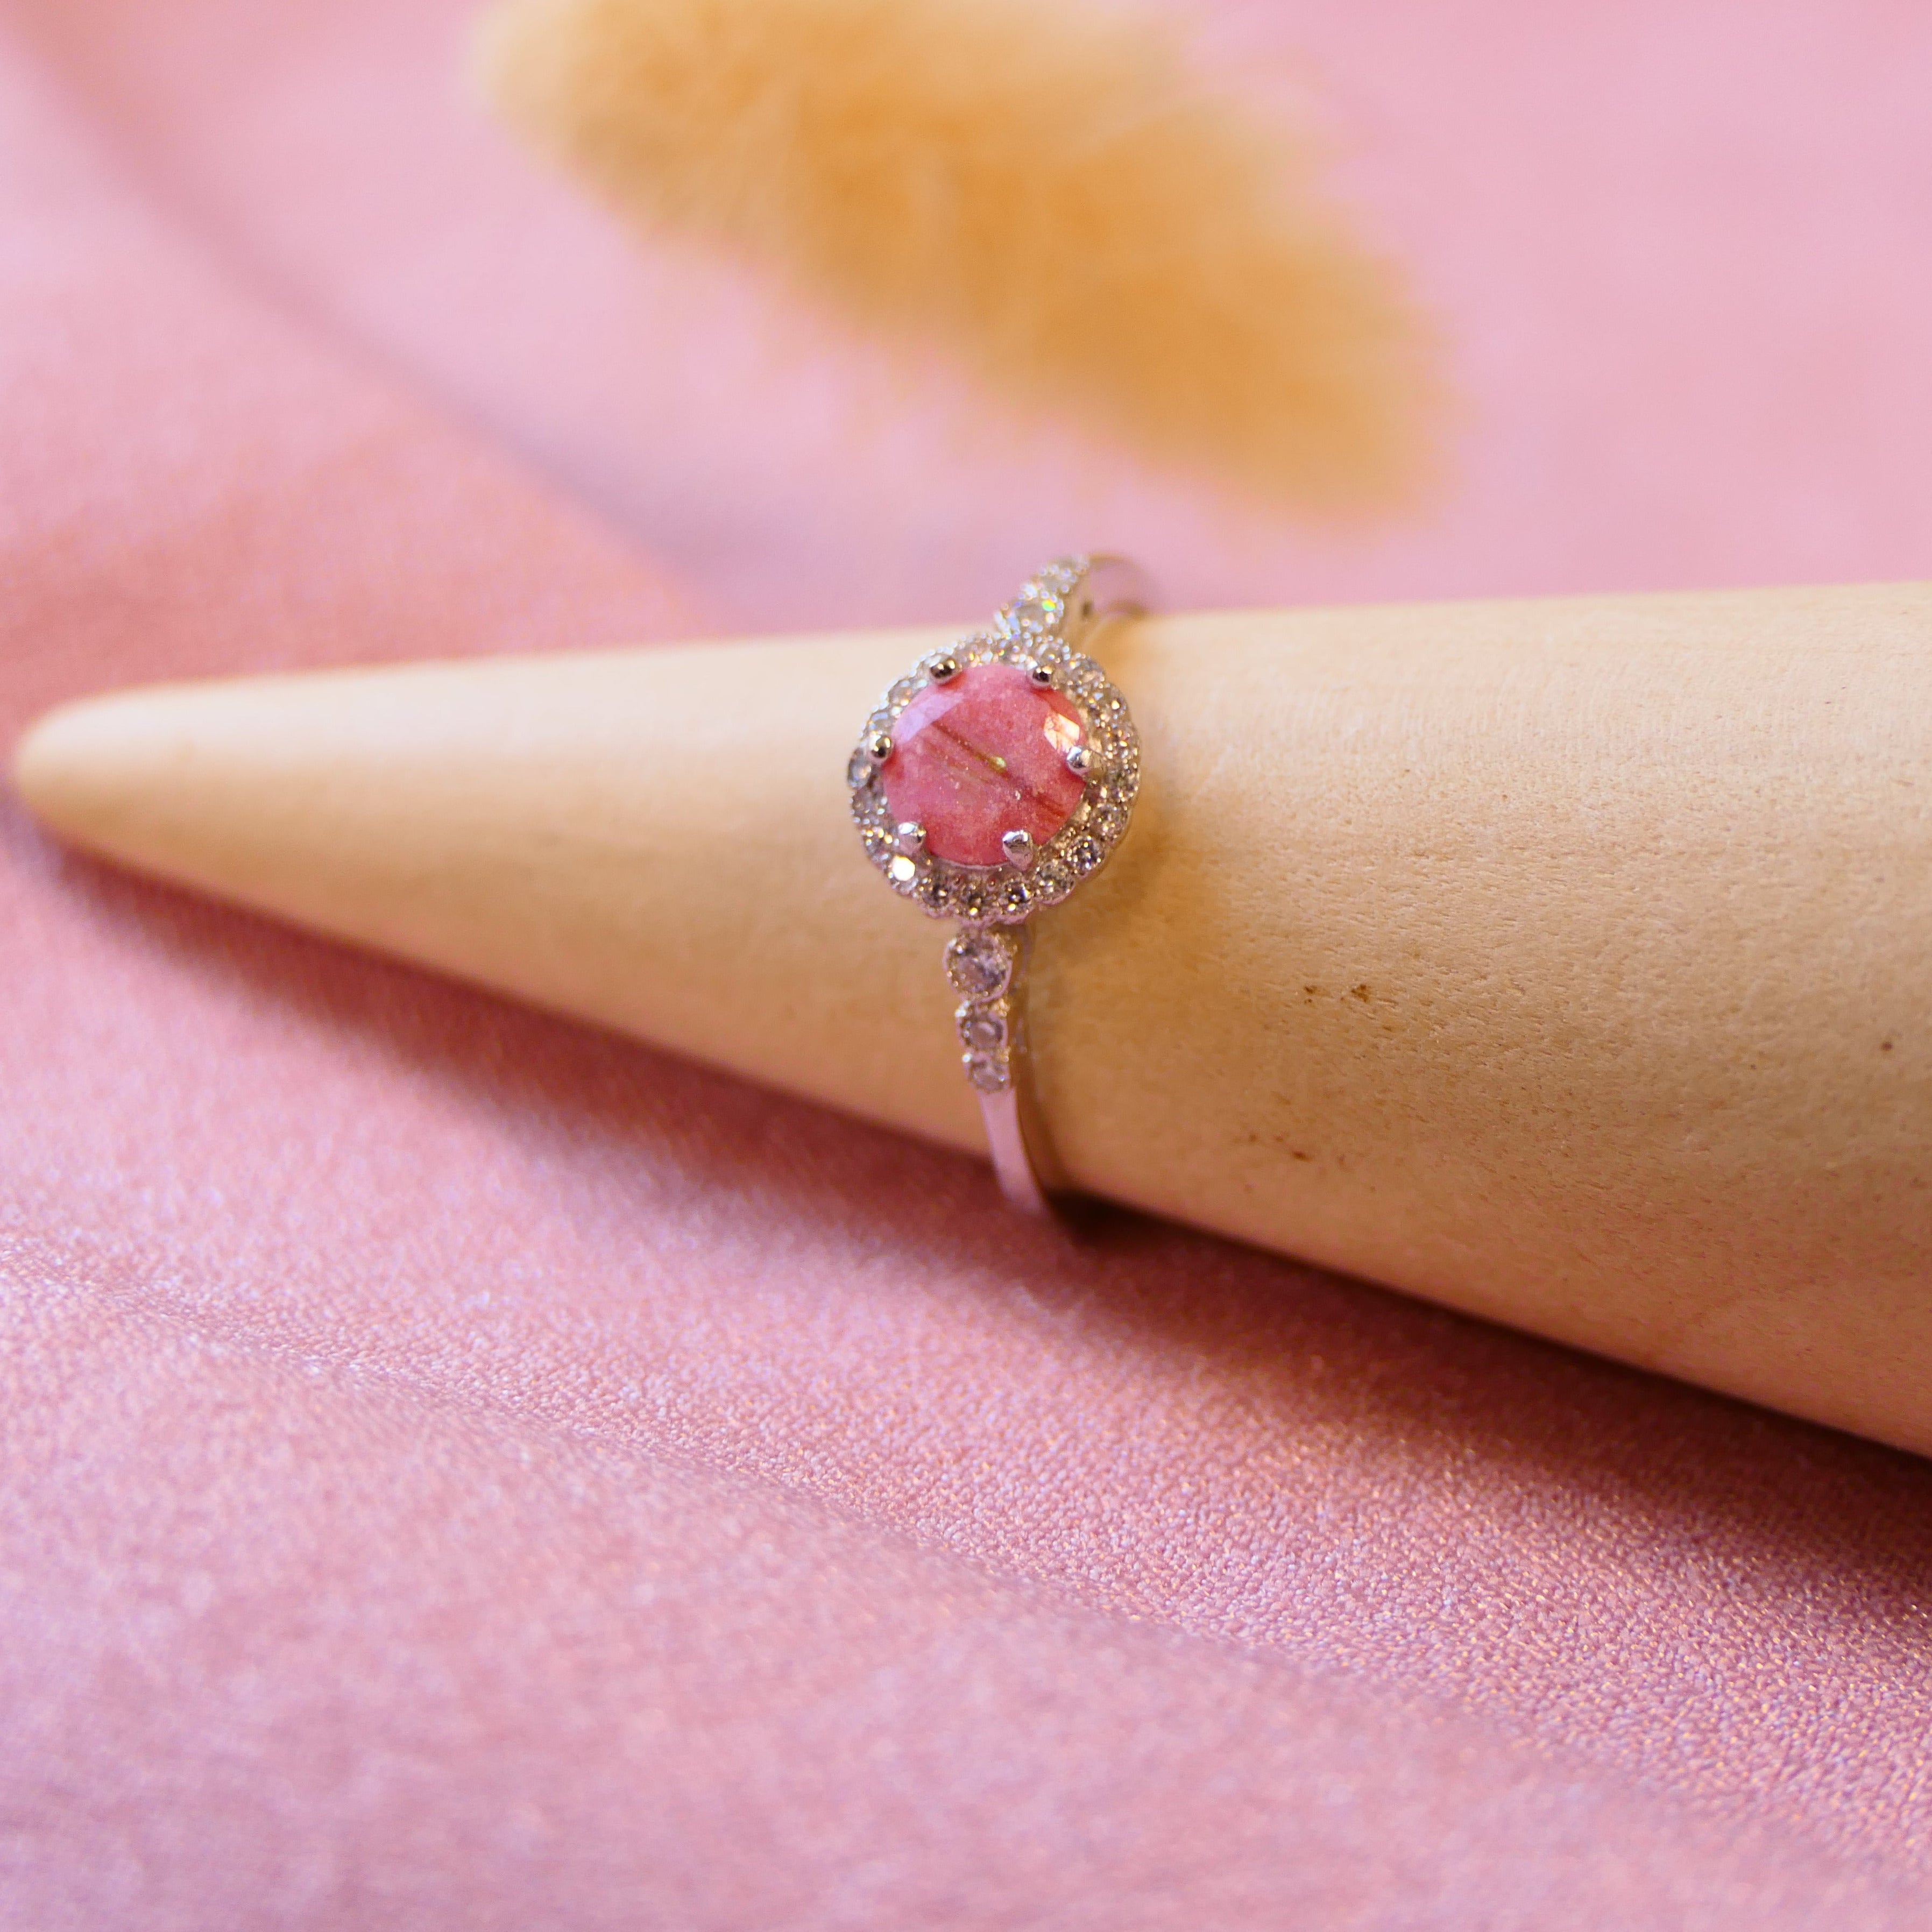 memorial ring with hair strands, opal flecks and briar rose pink shimmer